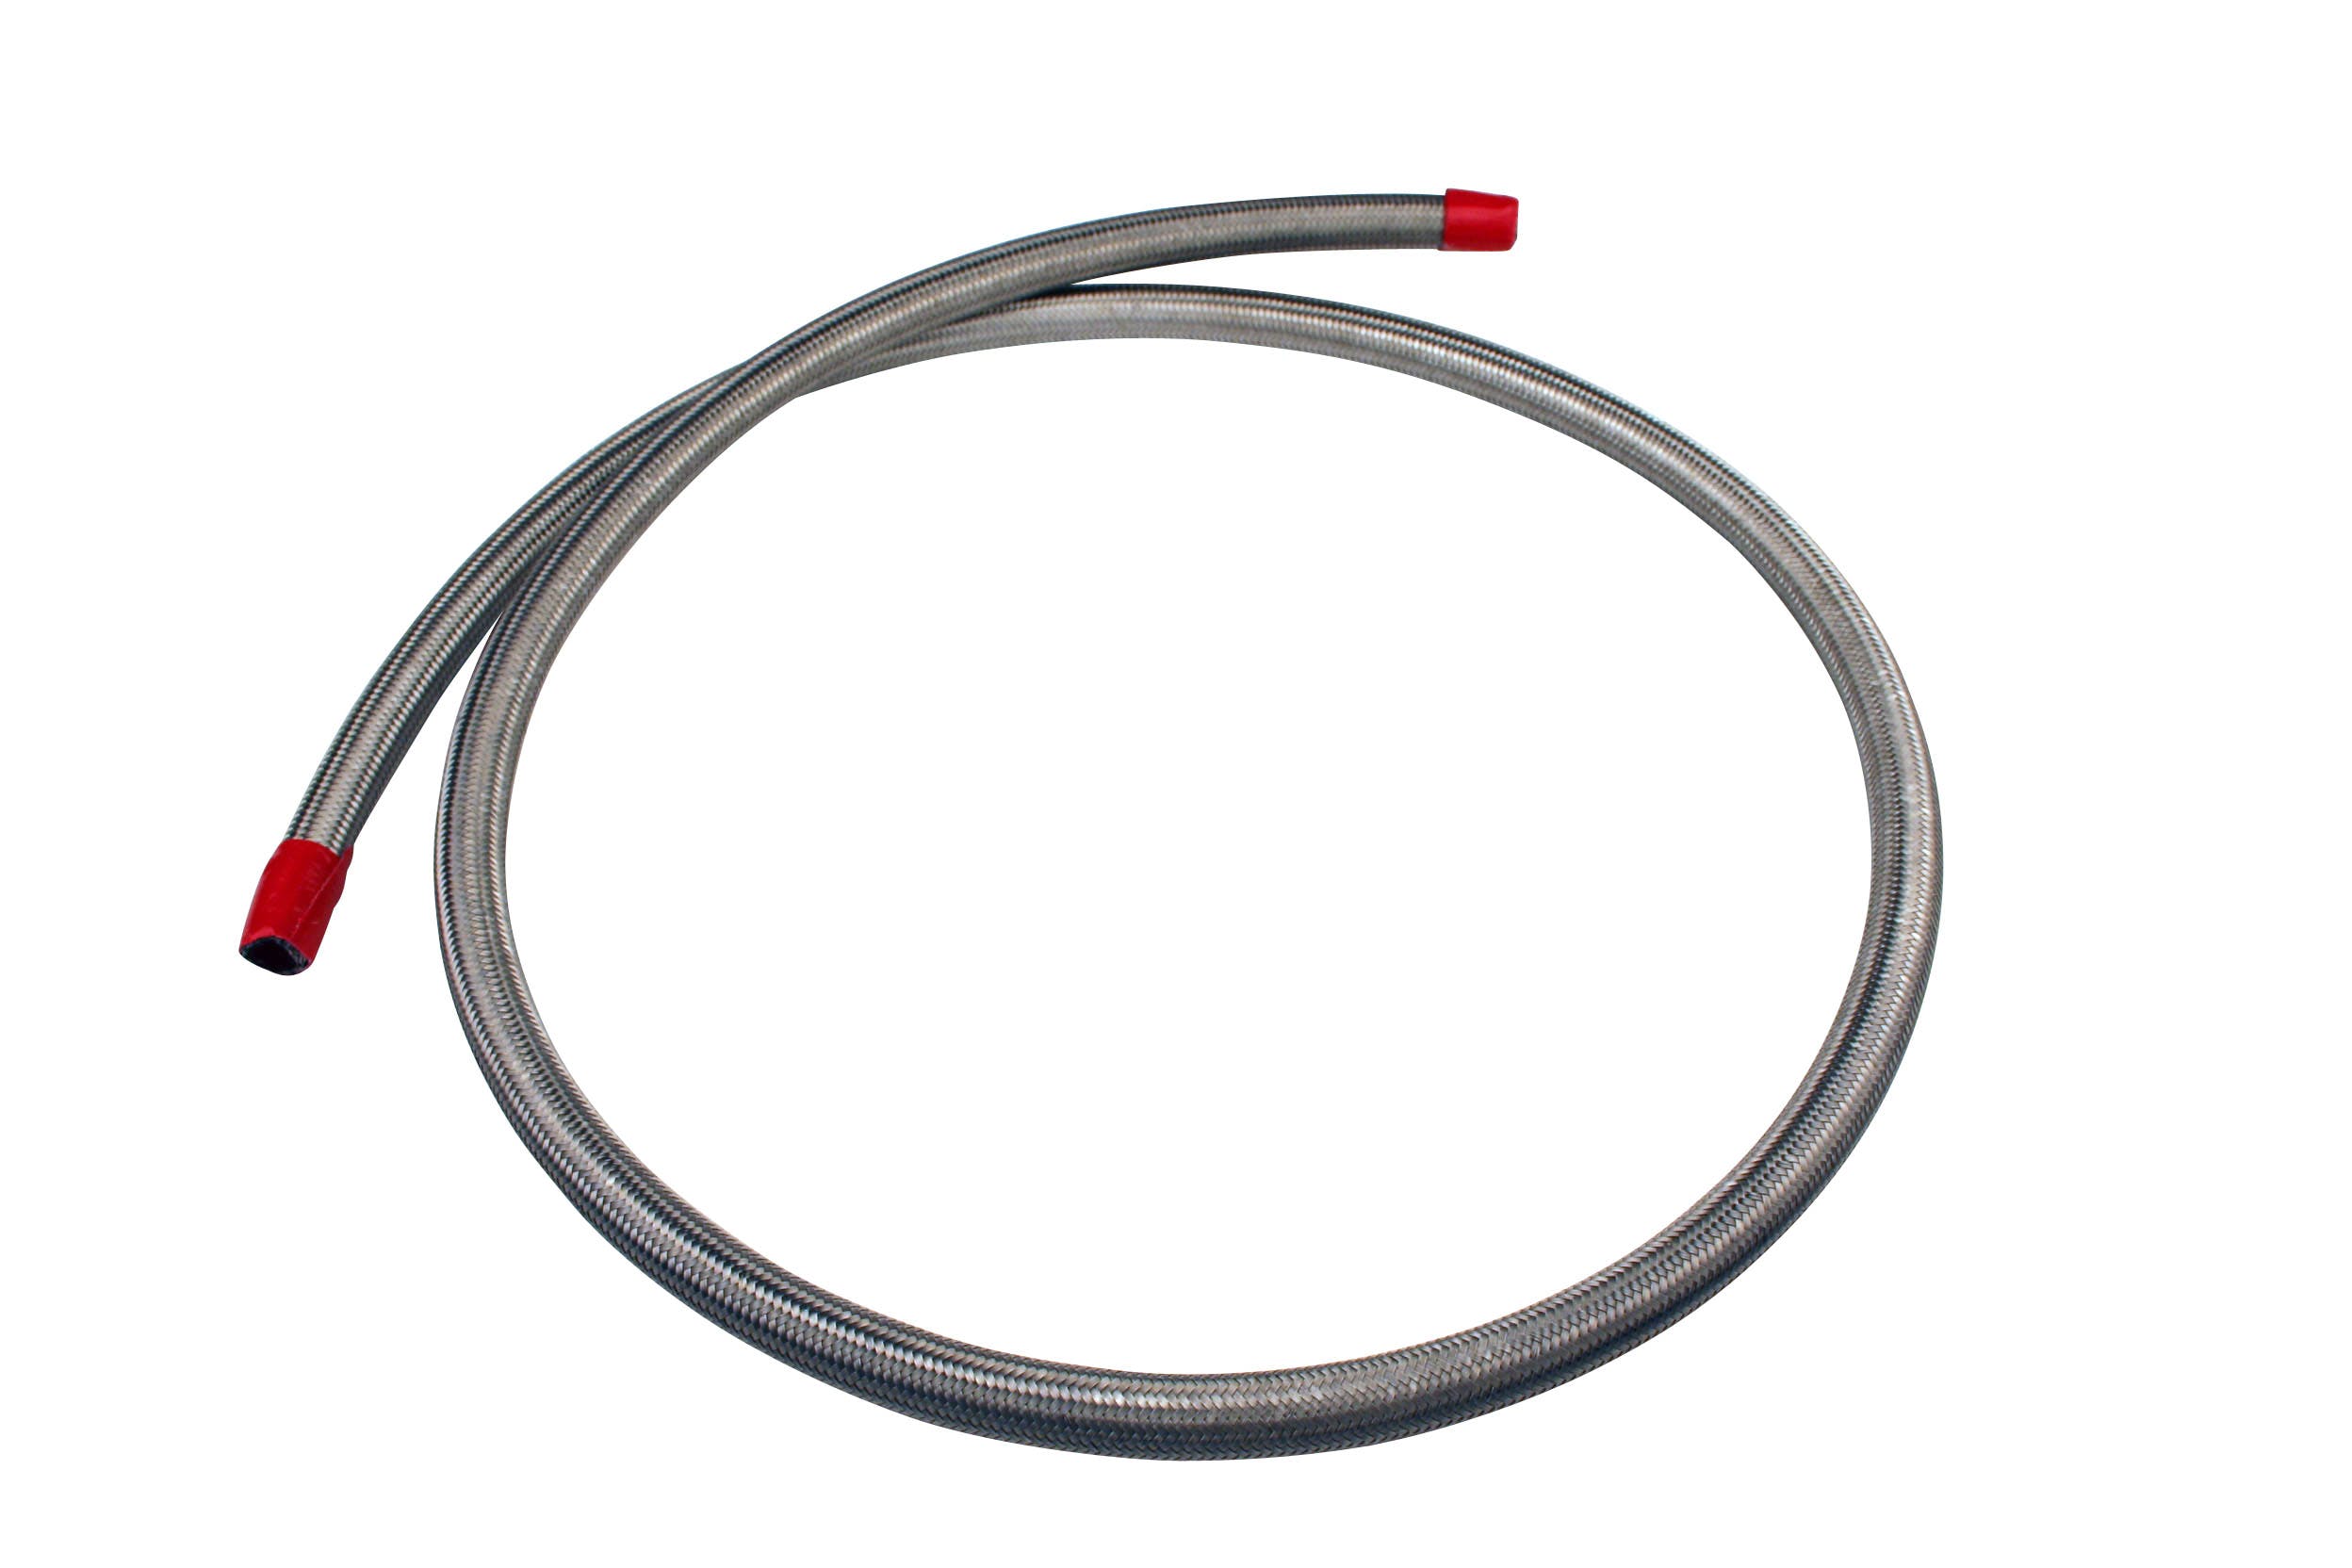 Aeromotive Fuel System 15704 Hose, Fuel, Stainless Steel Braided, AN-08 x 4